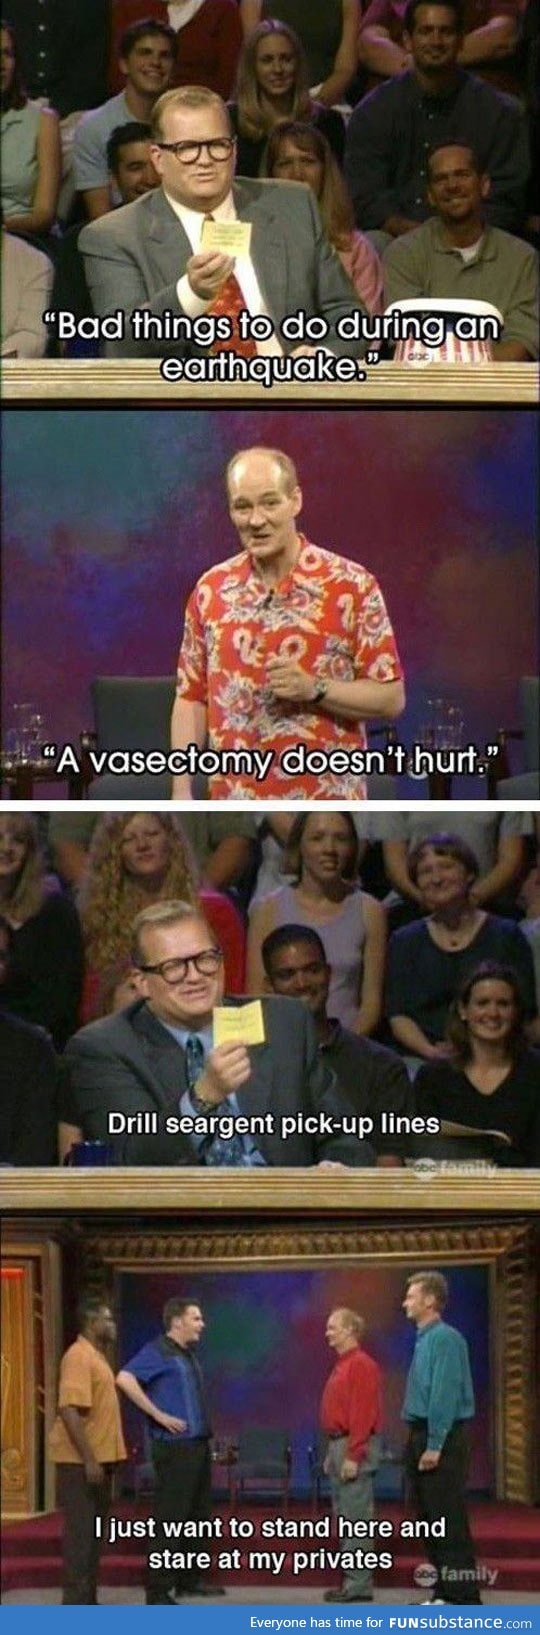 The best of Whose Line Is It Anyway?